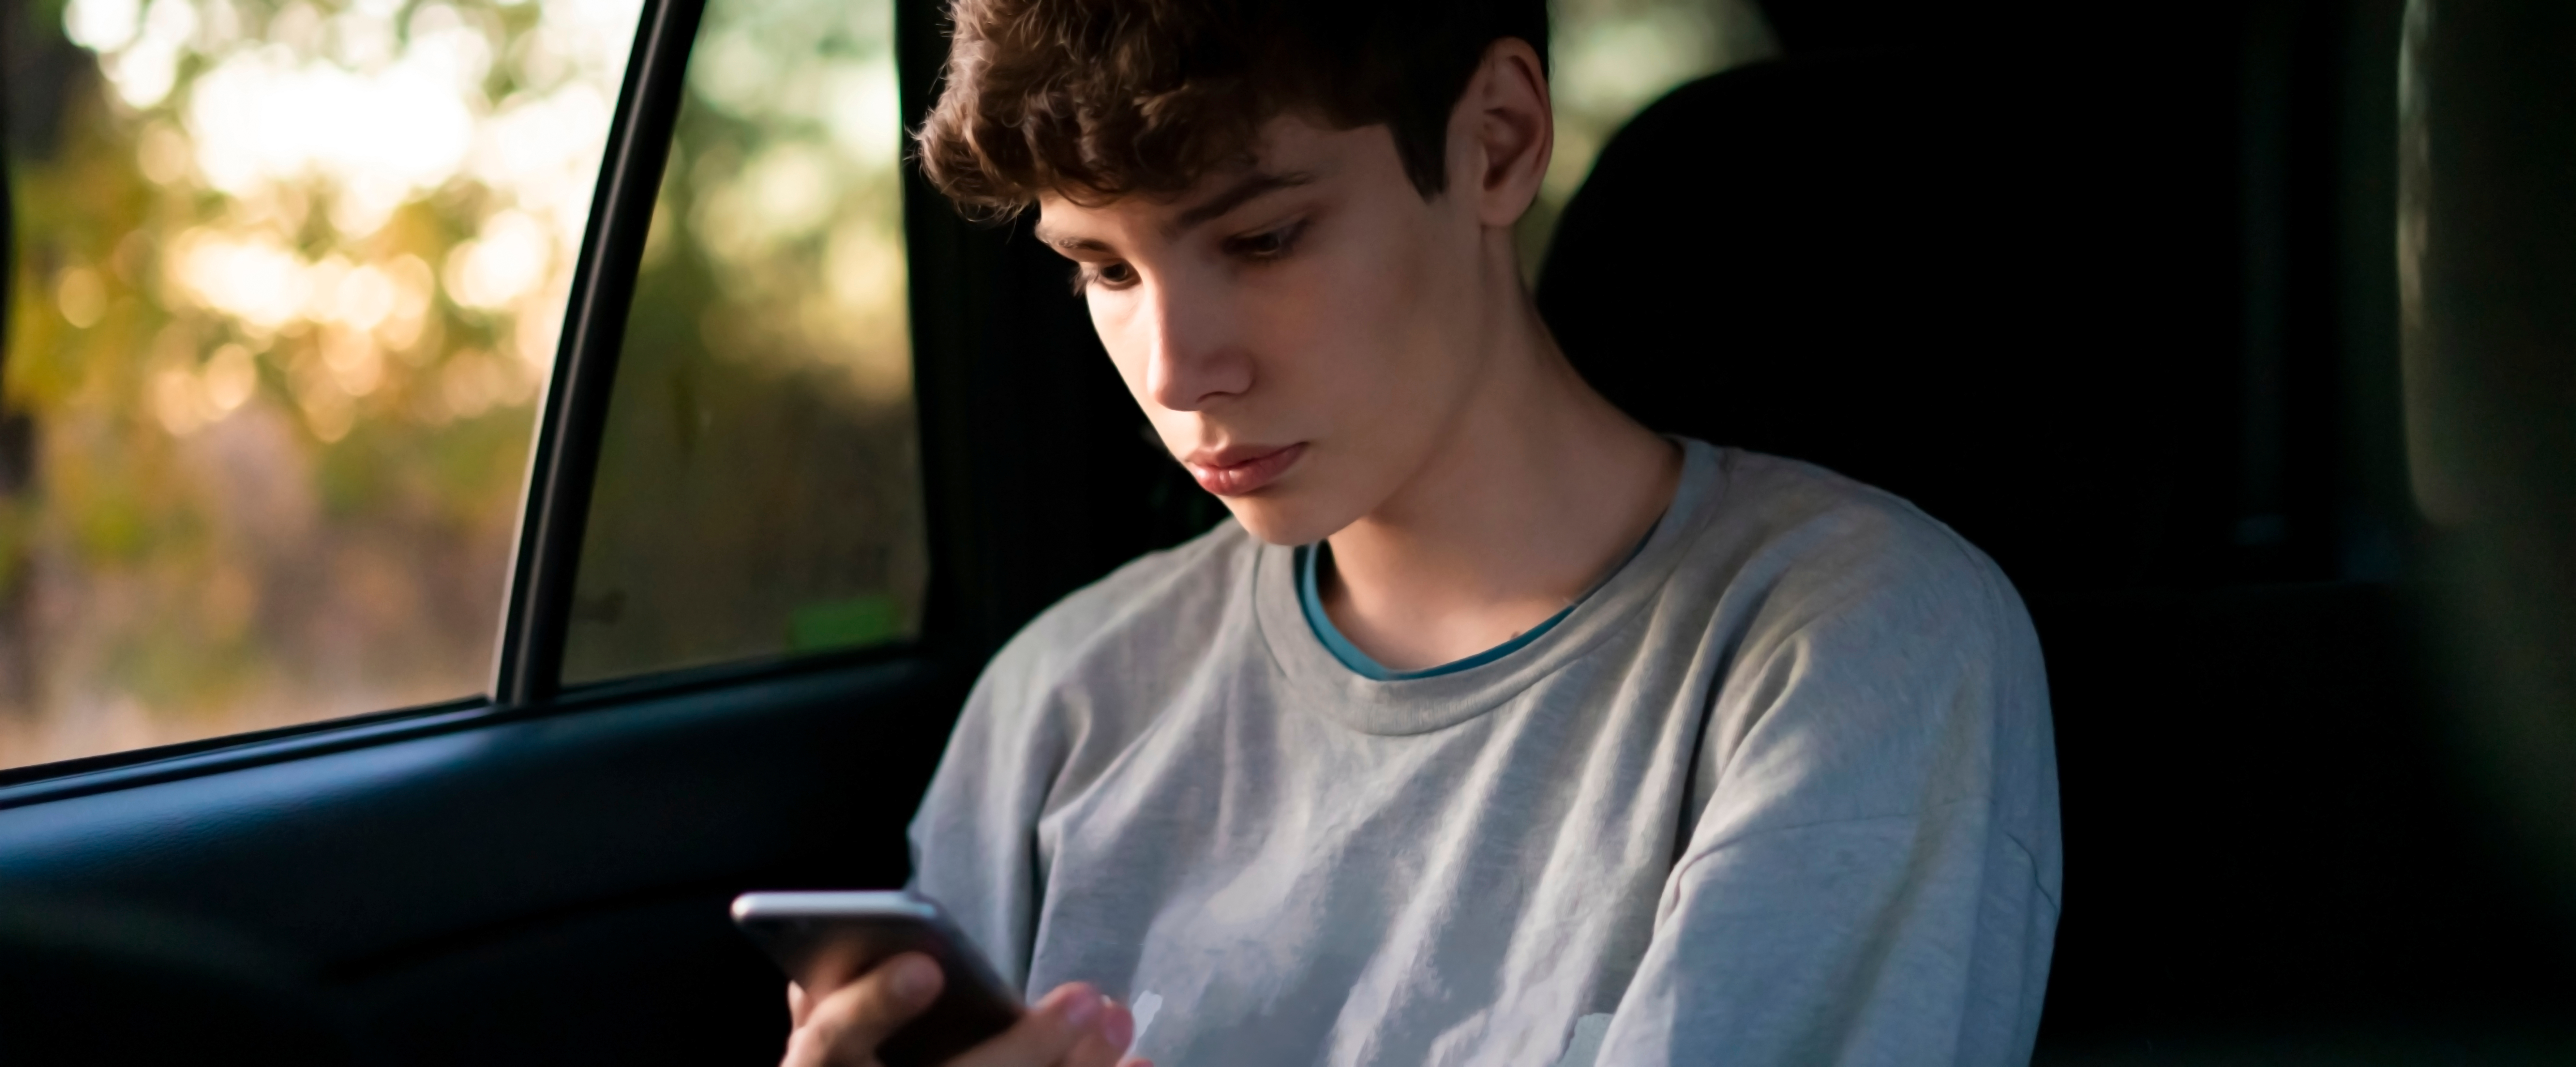 Young male passenger sitting on car back seat using a smartphone. | Source: Shutterstock